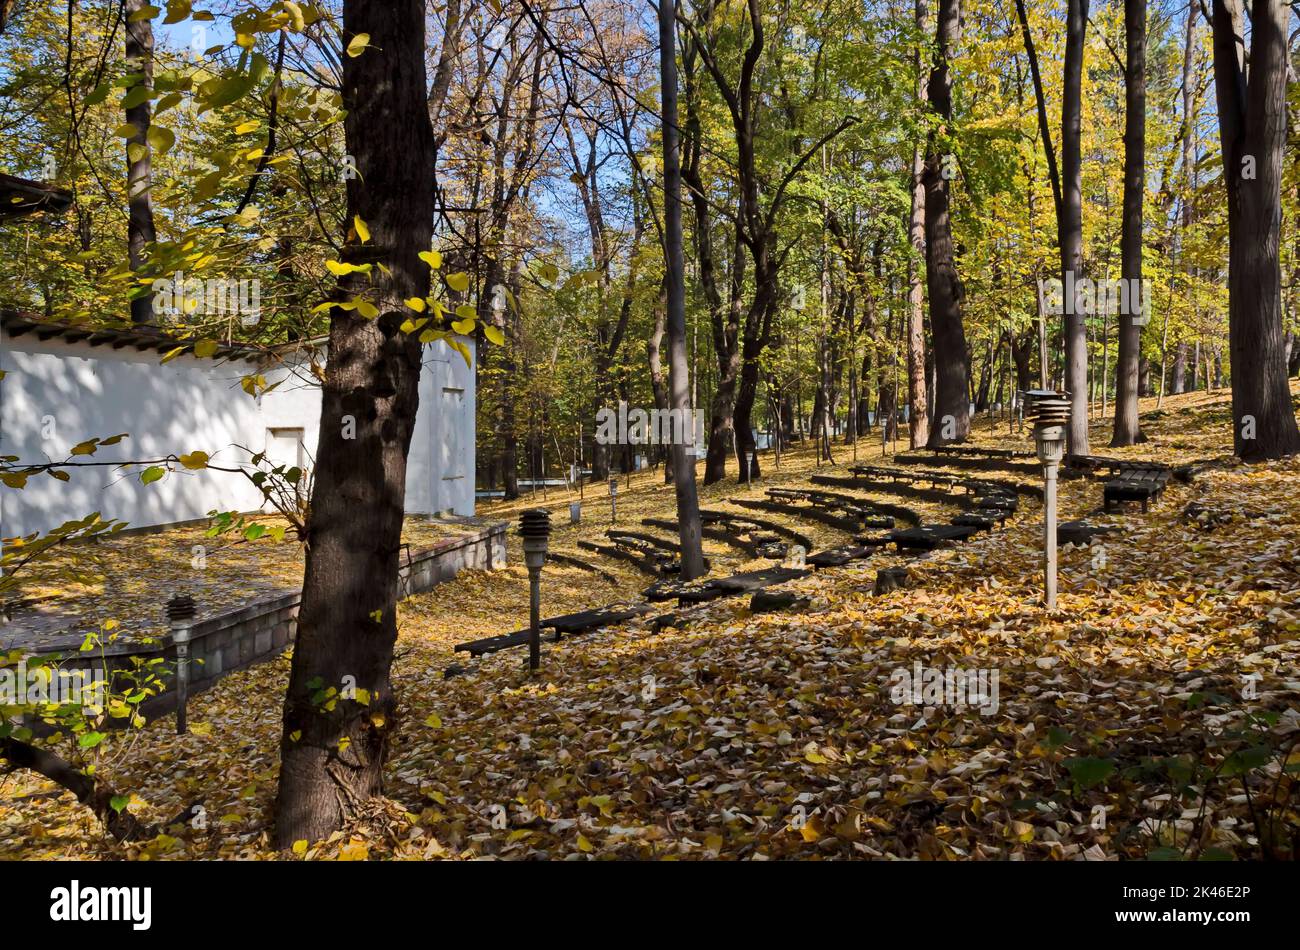 Perennial improvised amphitheater in a colorful autumn forest with branching trees with beautiful leaves, some of which profusely covered the ground, Stock Photo